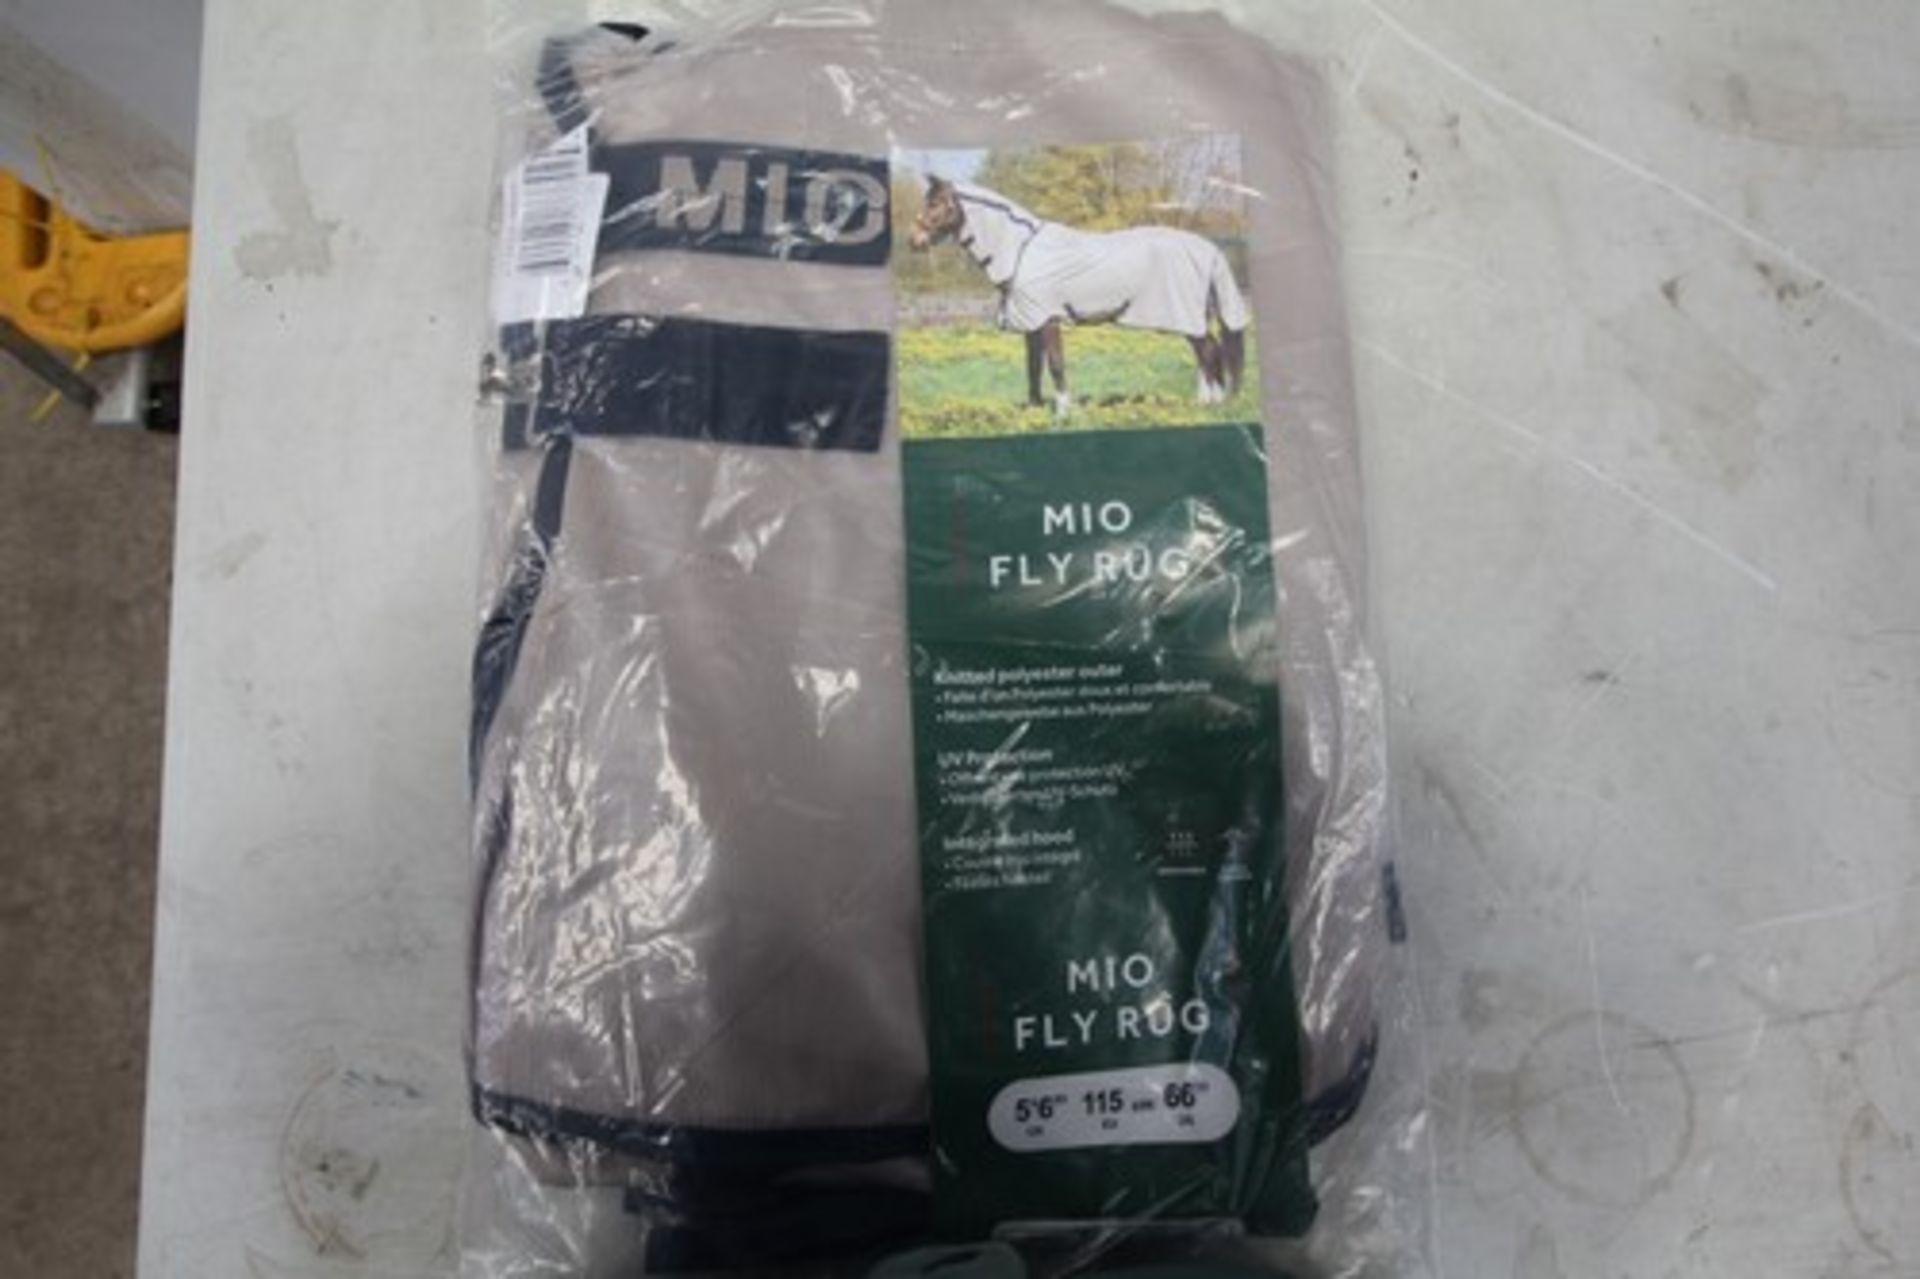 1 x Horseware Mio fly rug, size 5'6" - New in pack (GS22)